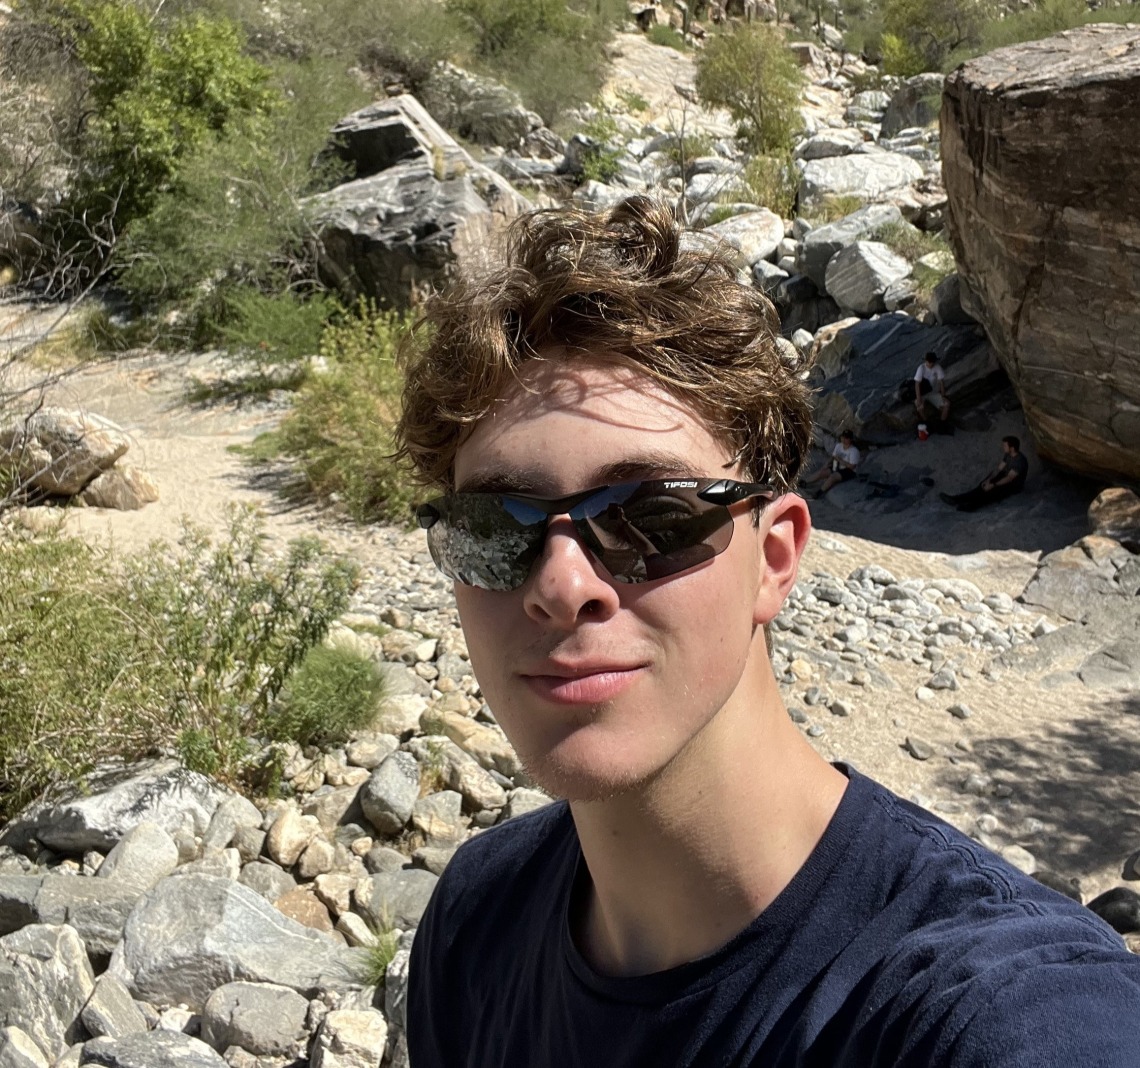 Jackson Taylor in the desert wearing black shades and a navy blue tee smiling towards the camera